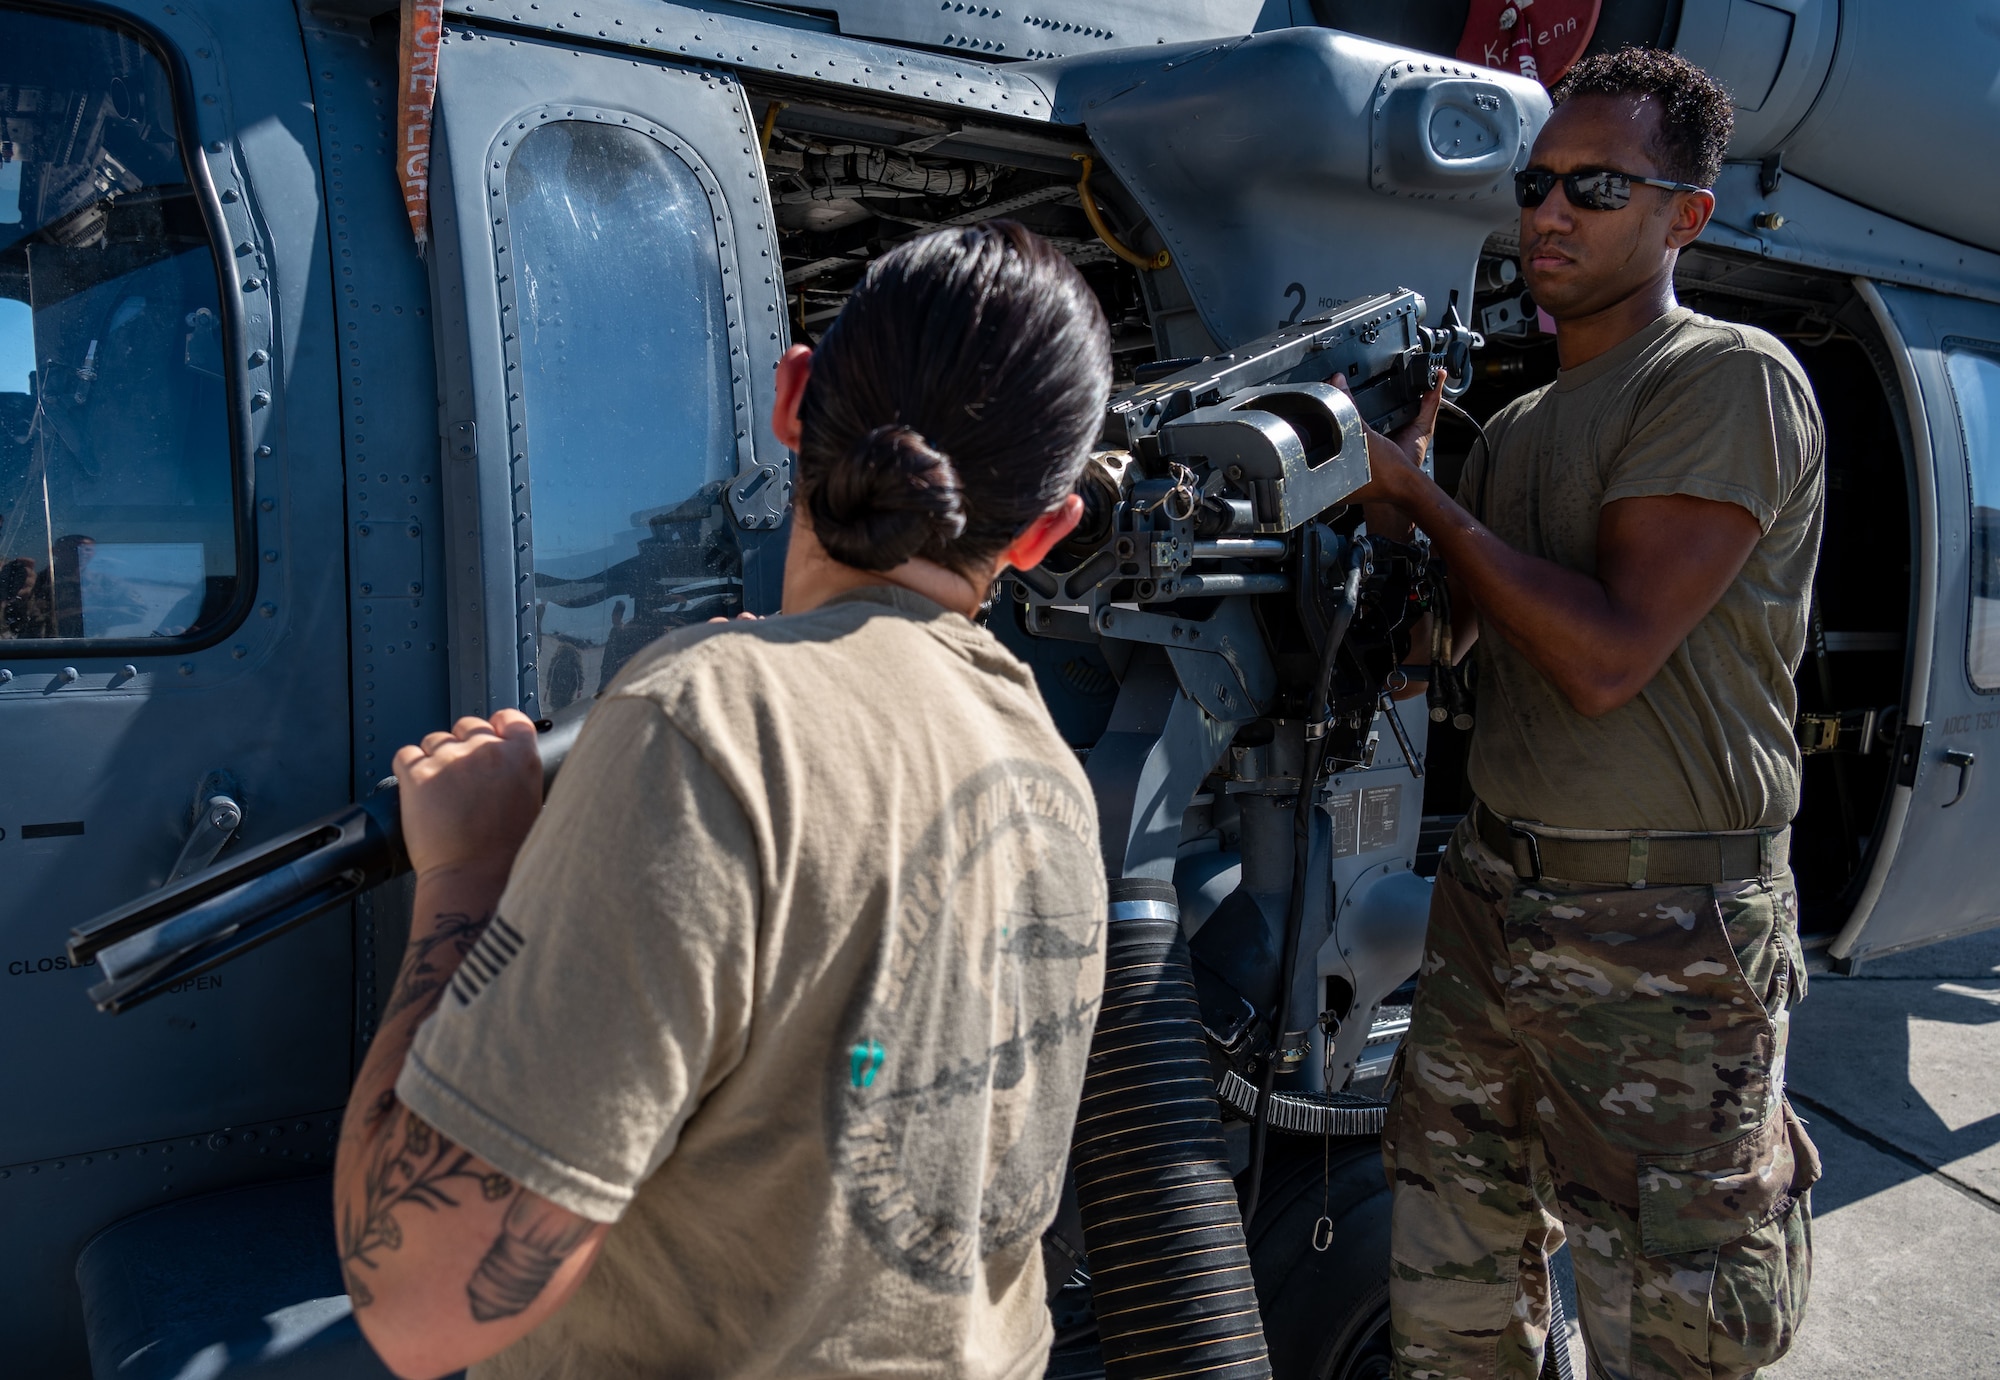 Senior Airman Andrew Hernandez and Staff Sgt. Taylor Bender, 920th AMXS weapons load crew members, remove a GAU-18 machine gun from a 920th Rescue Wing HH-60G Pave Hawk helicopter Aug. 6, 2022 at Patrick Space Force Base, Florida. (U.S. Air Force photo by Master Sgt. Kelly Goonan)